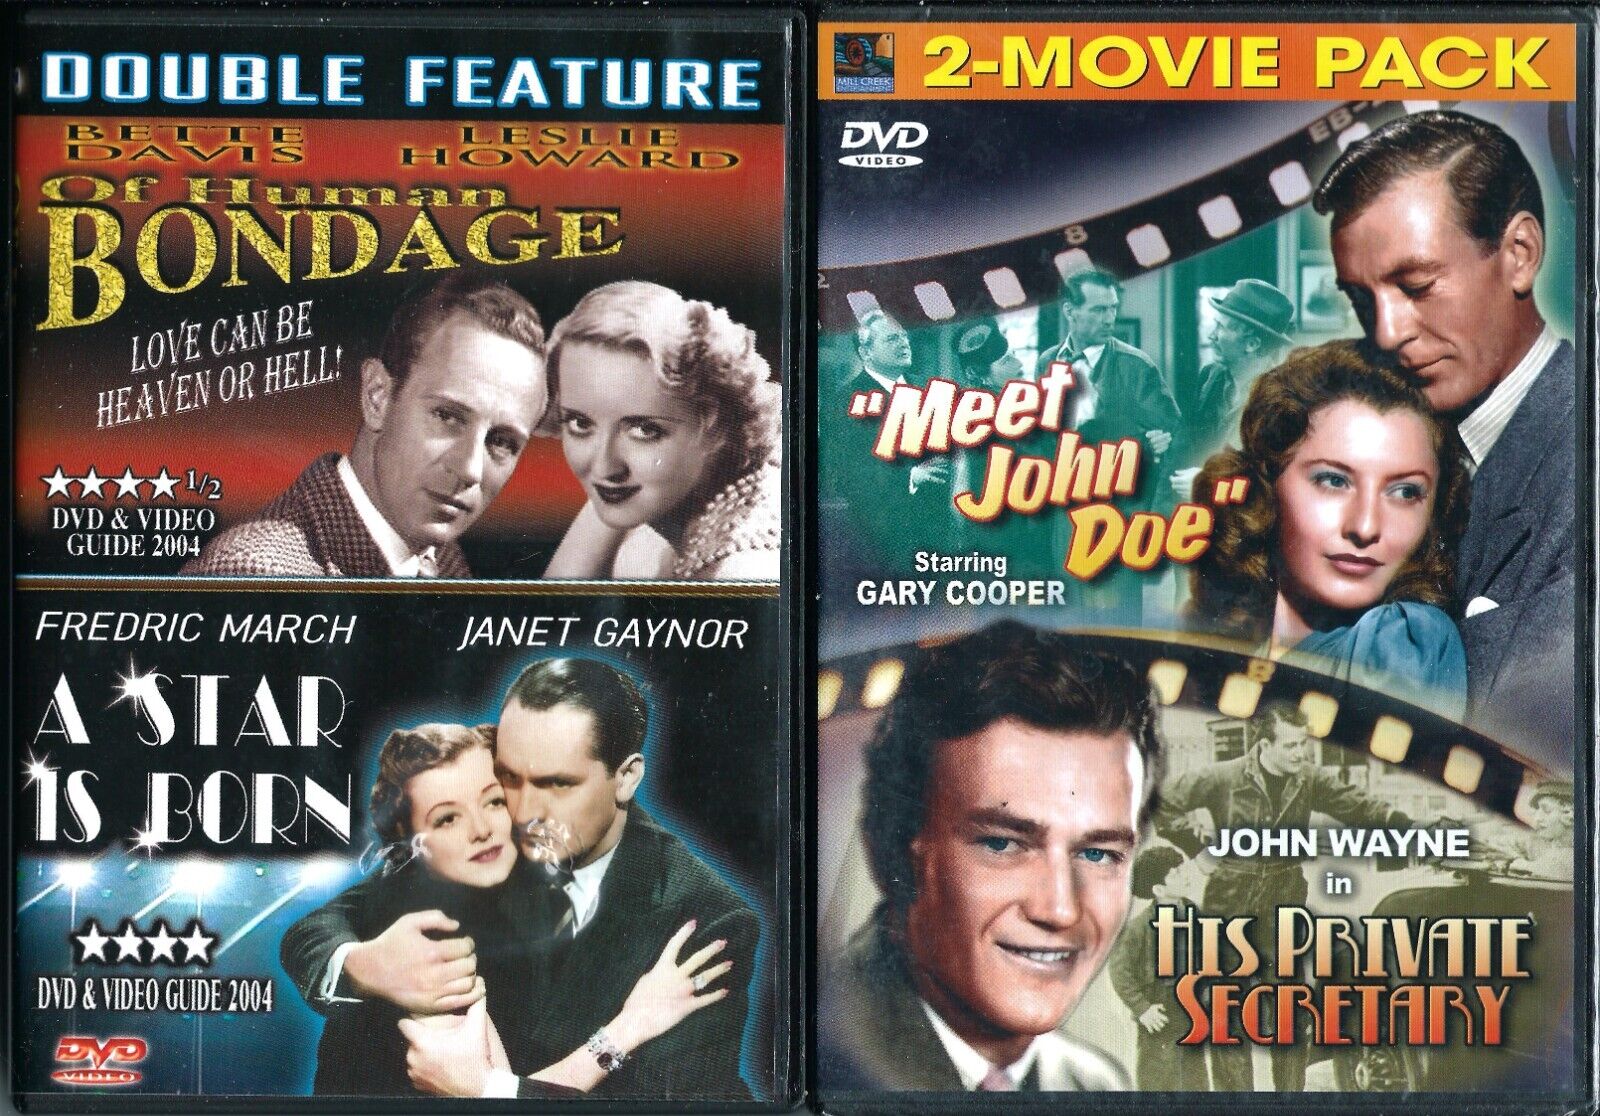 4 CLASSIC VINTAGE MOVIES (1930\'s & 1940\'s) on 2 DVDs Brand New Sealed